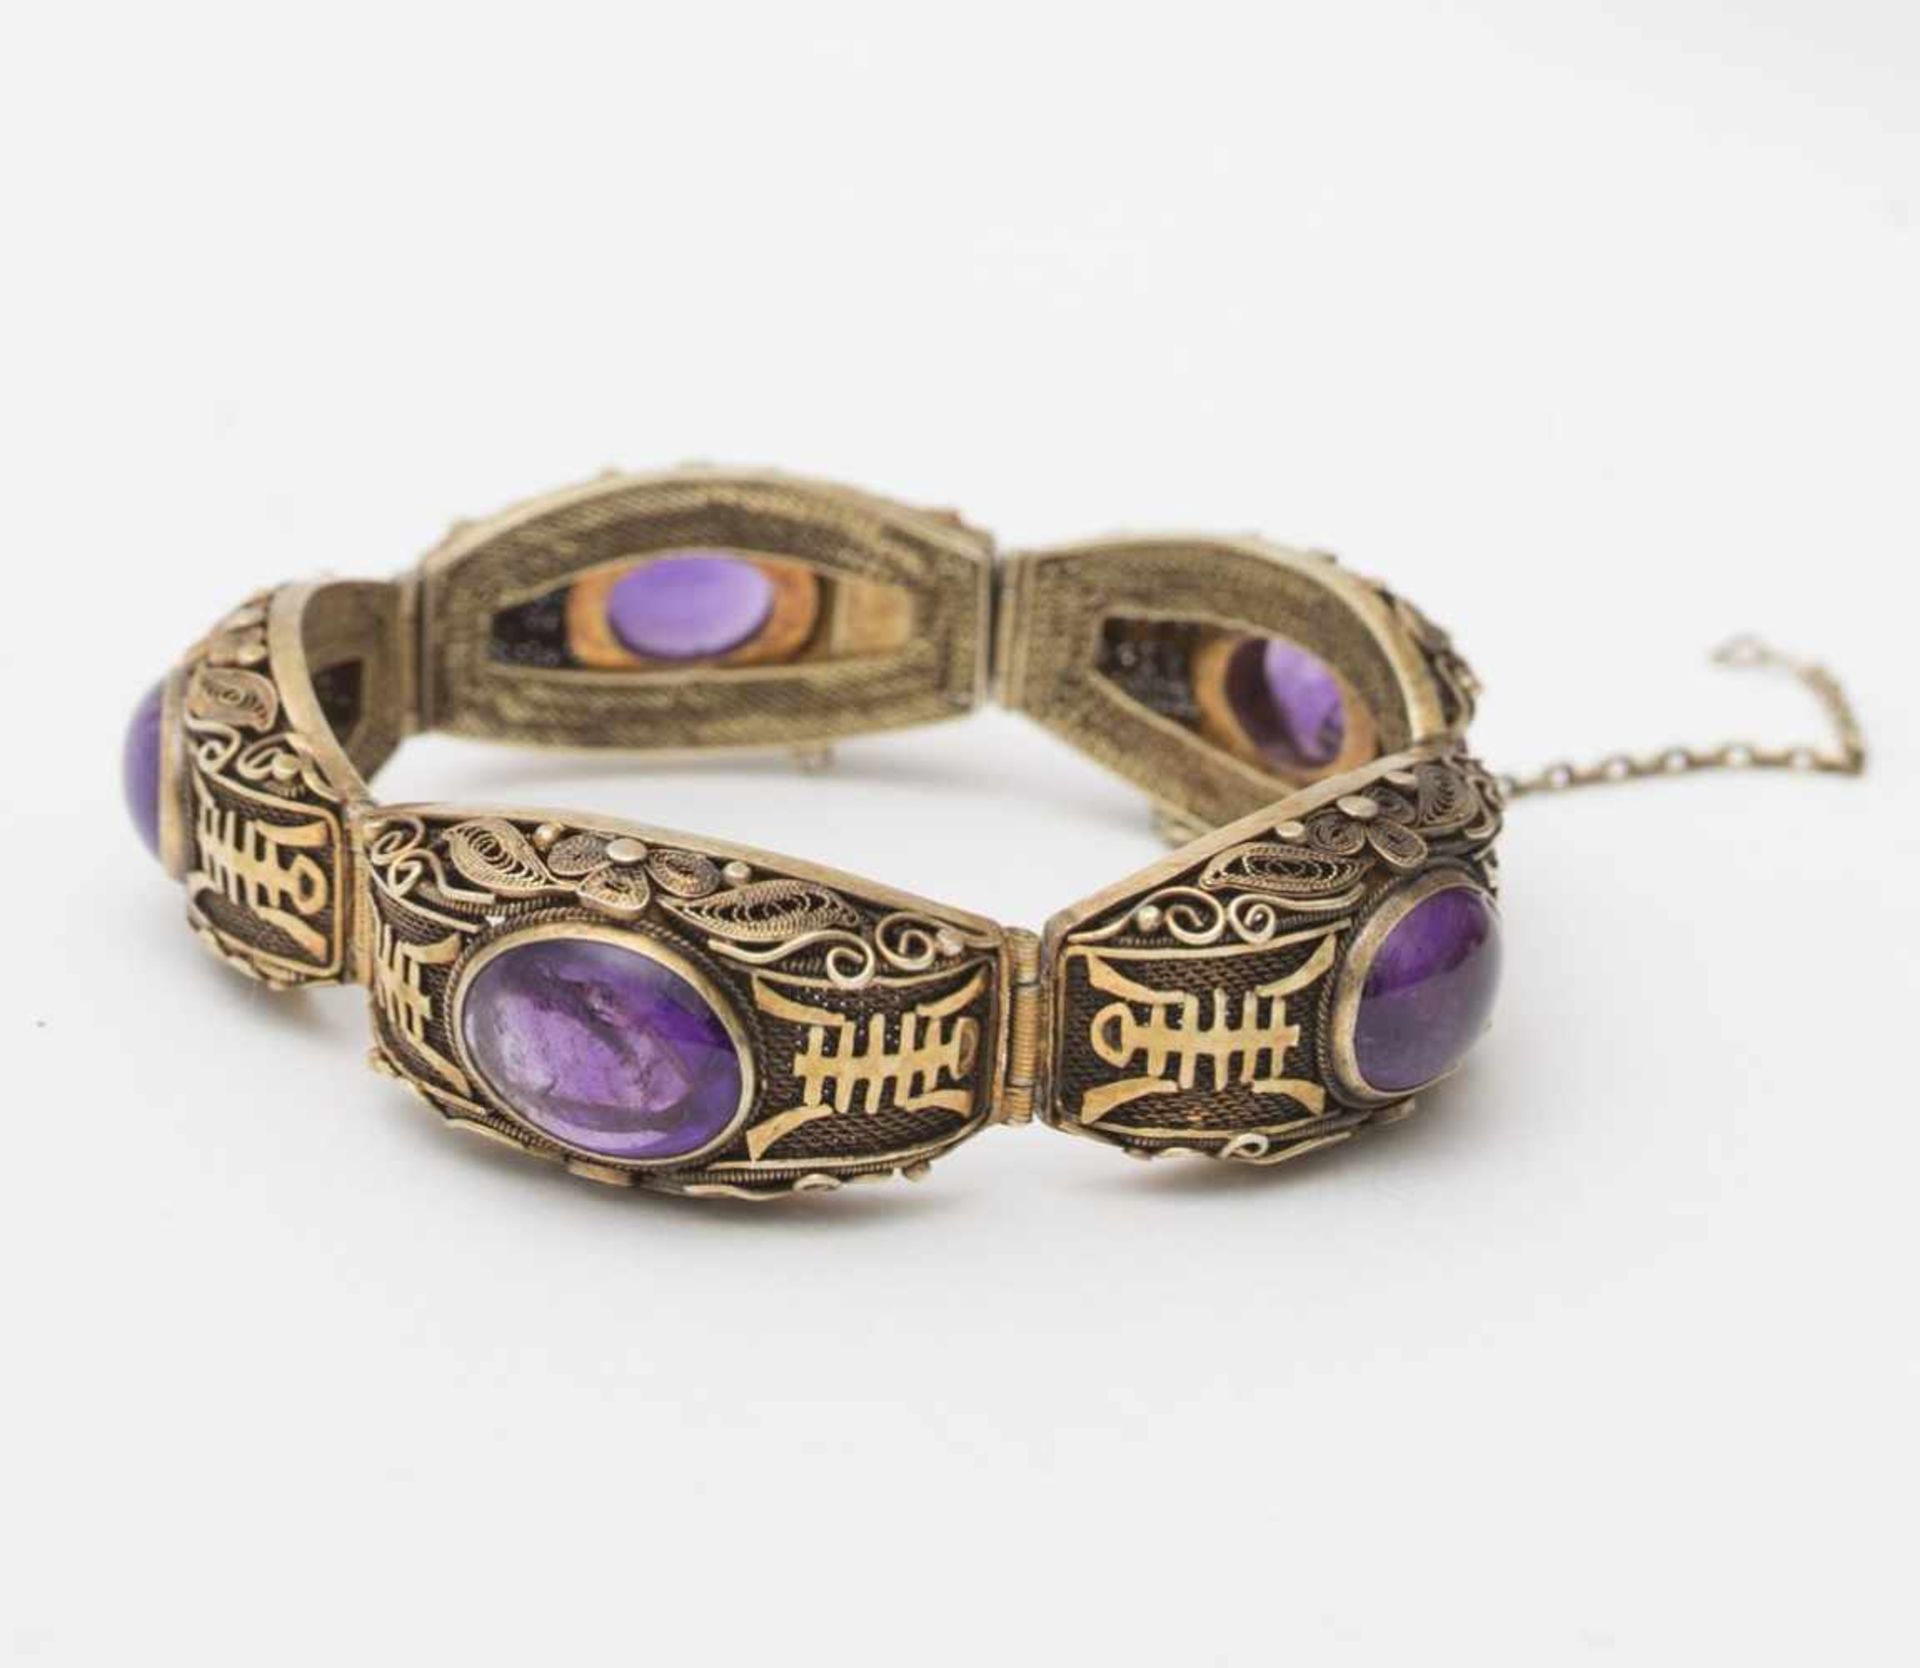 Bracelet set with amethysts - China, 20th century Articulated, composed of 5 rounded rectangular